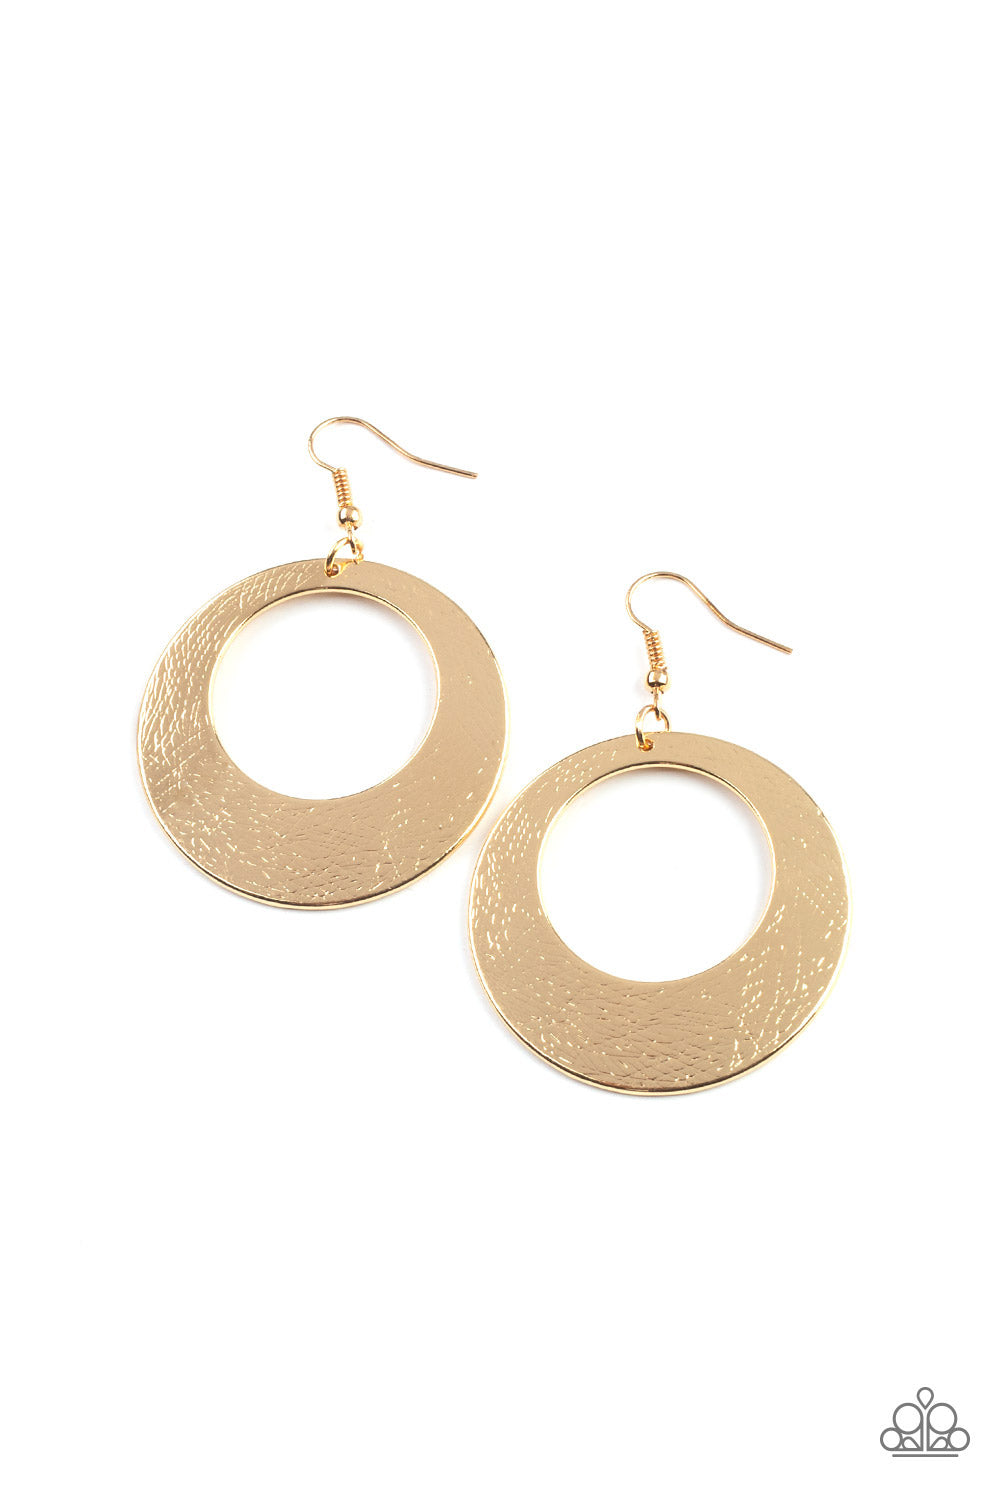 Paparazzi Accessories - Outer Plains #E527 - Gold Earrings